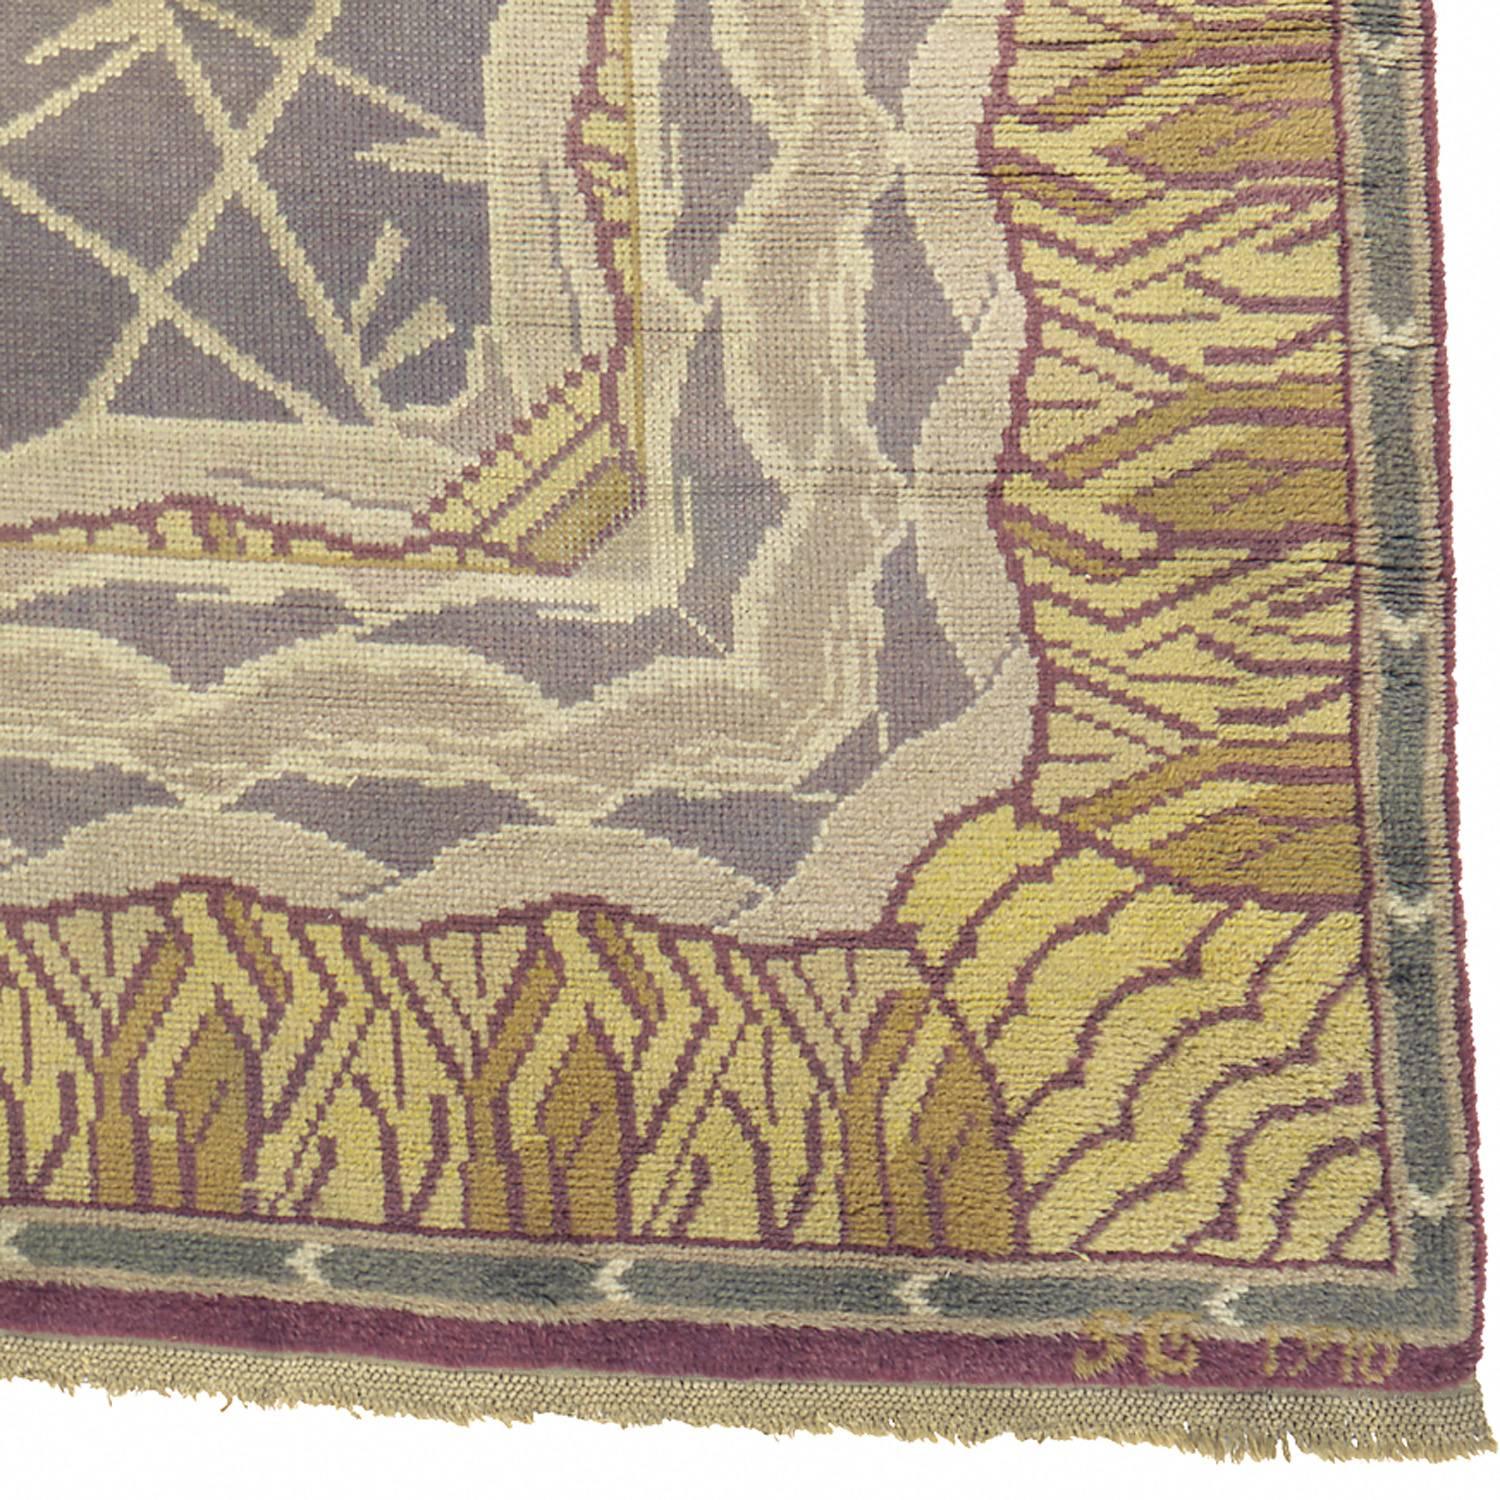 Early-20th century Swedish pile-weave carpet, initialed 